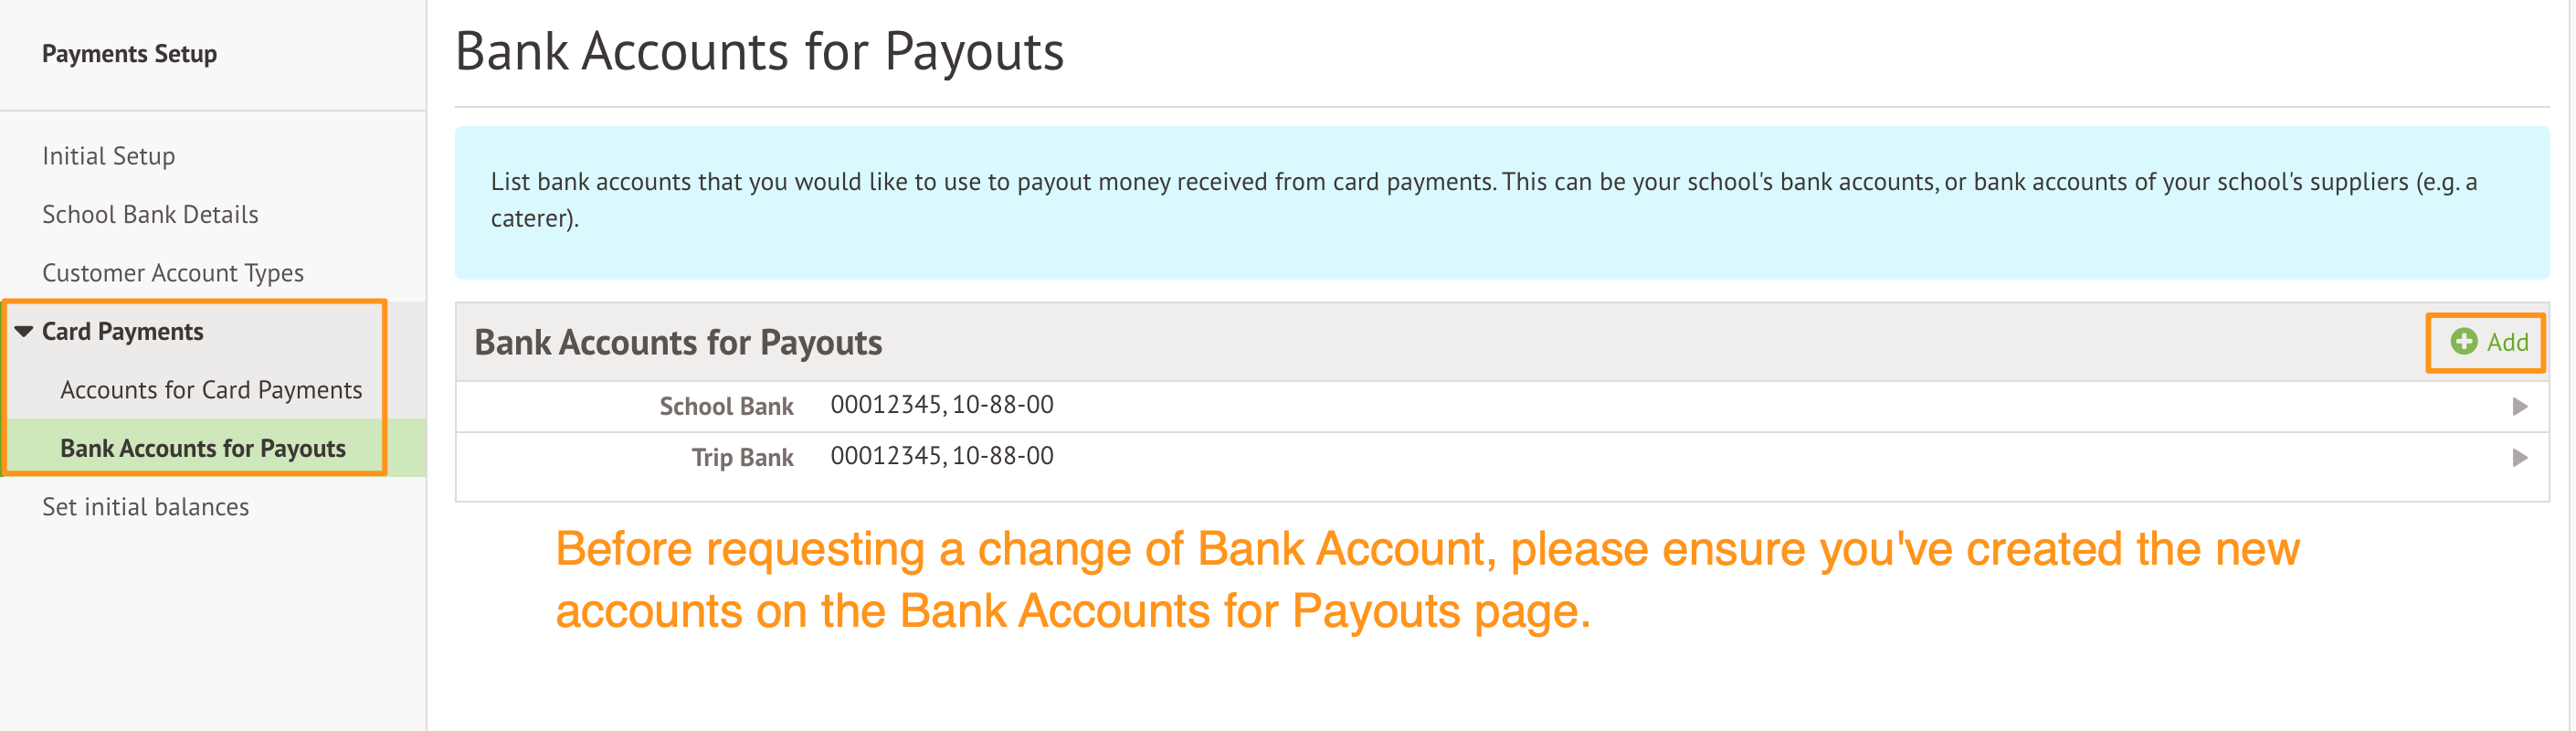 Bank_Accounts_for_Payouts.png